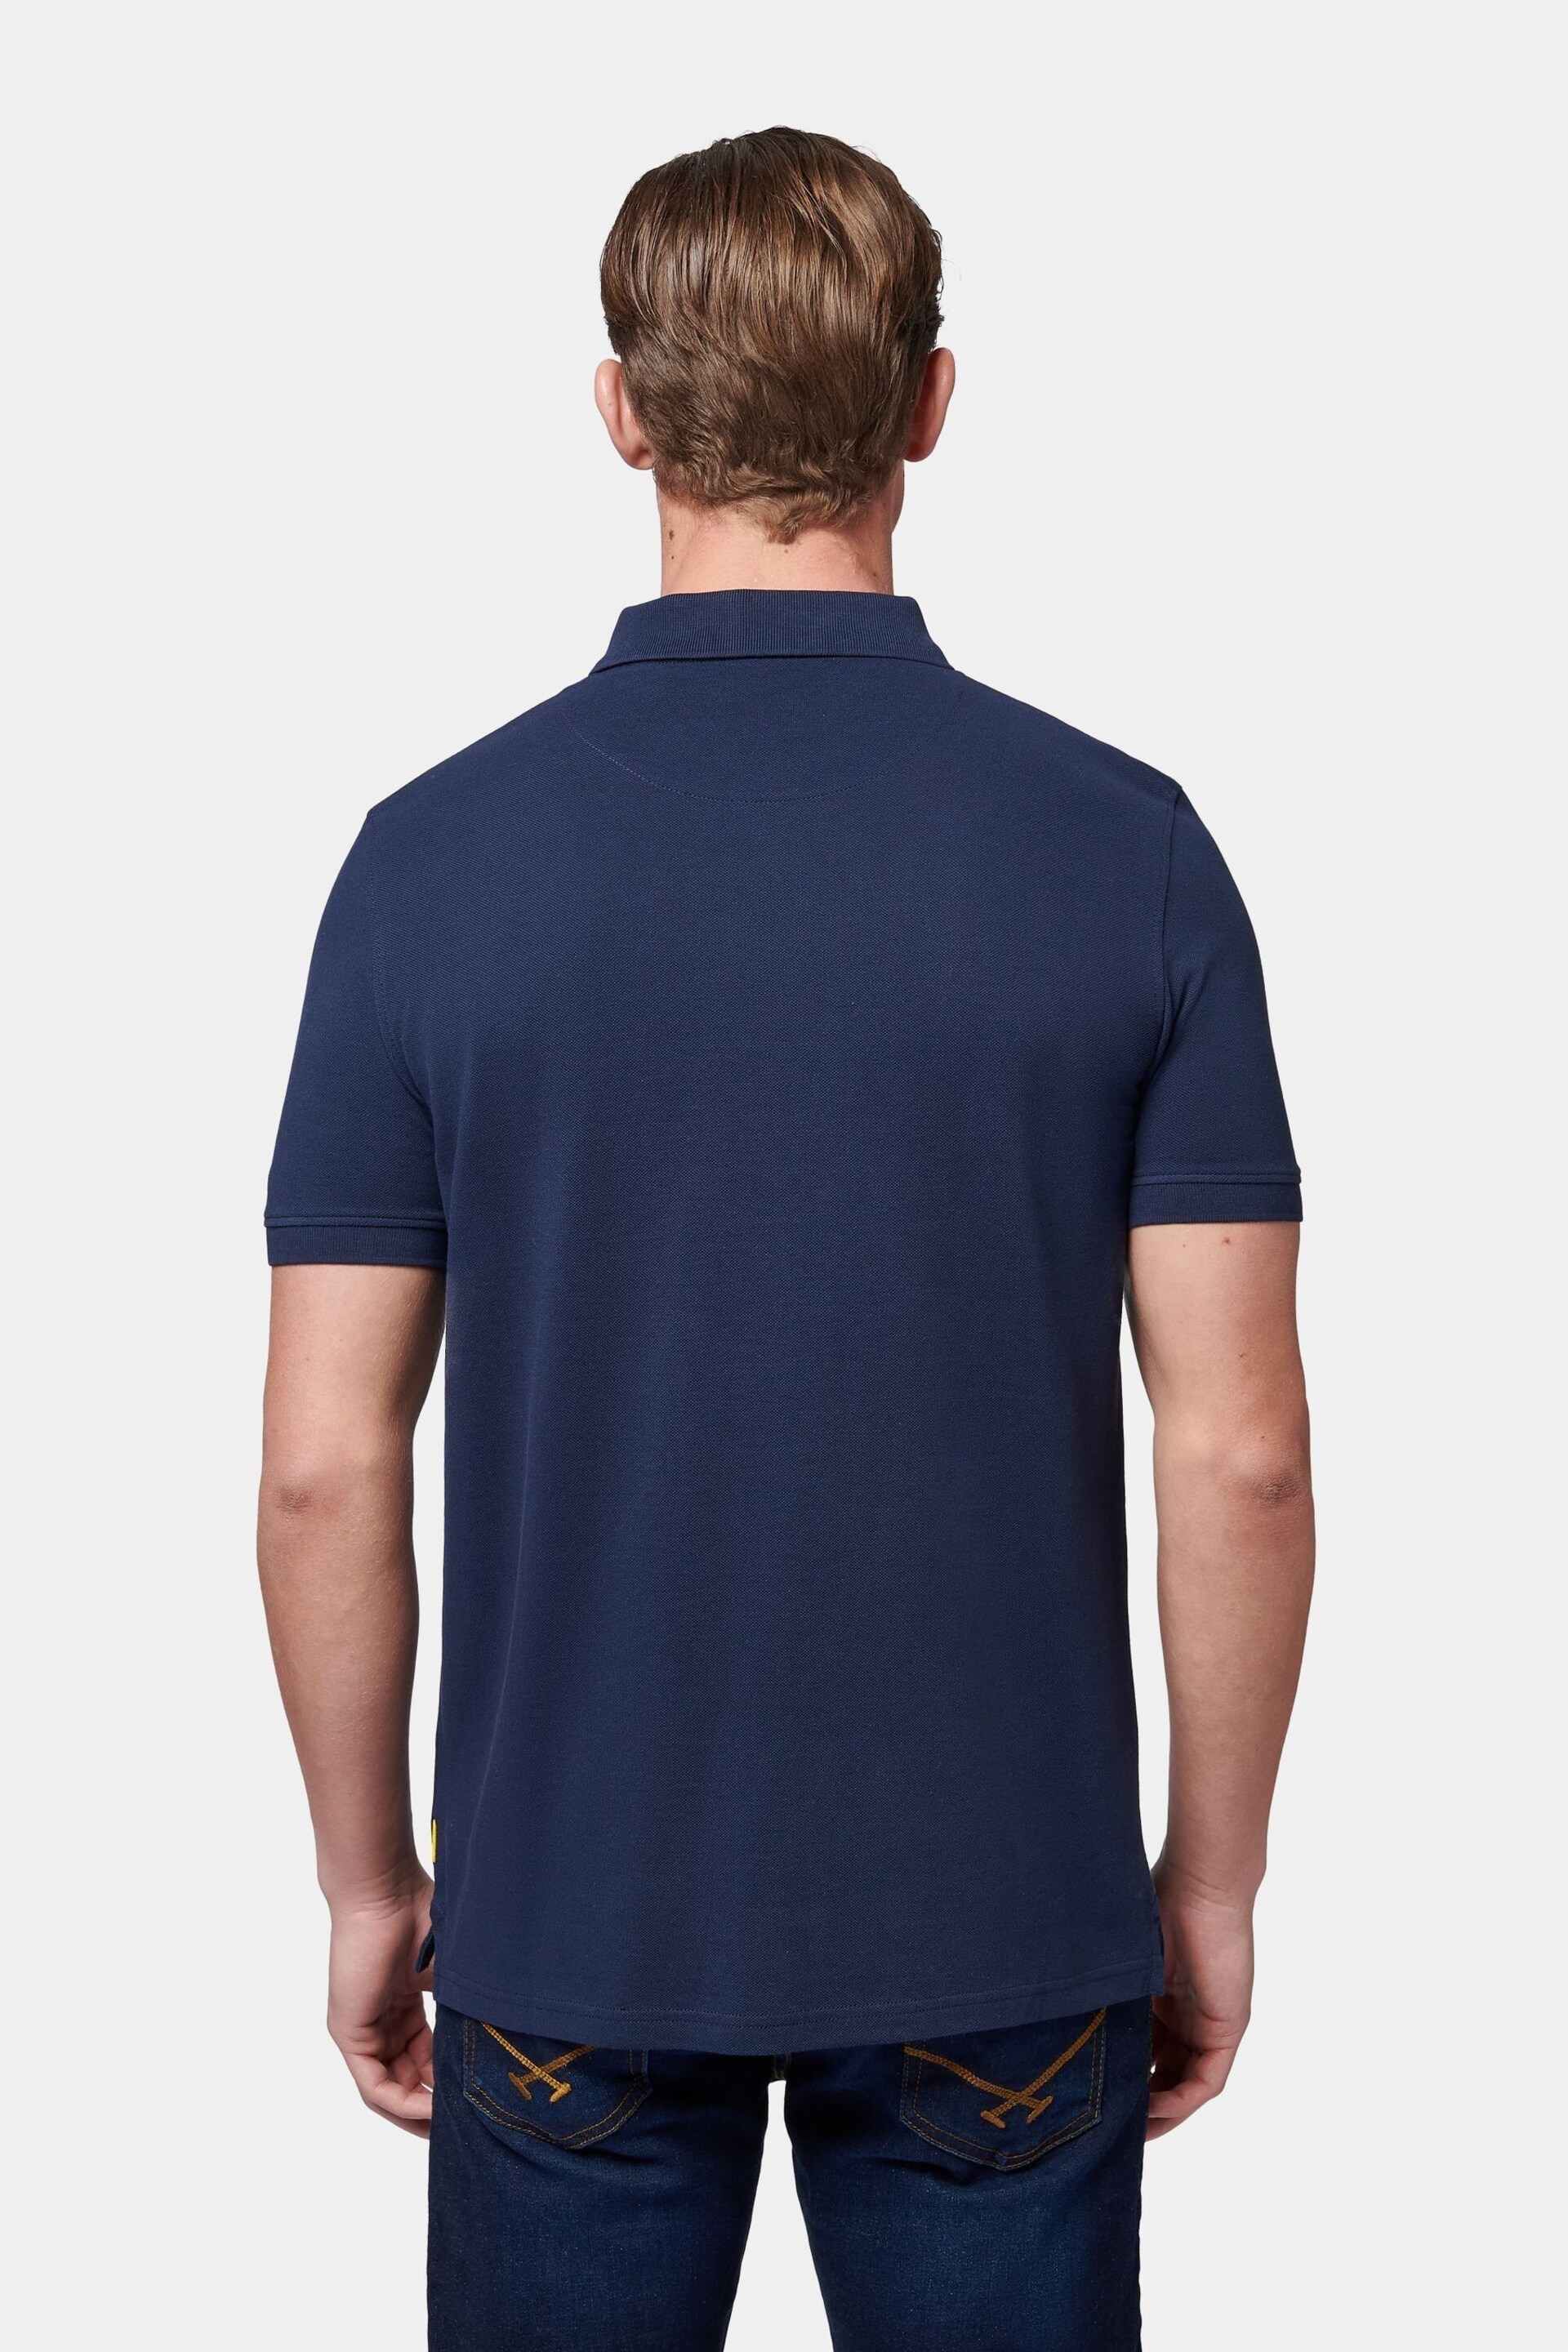 Flyers Mens Classic Fit Polo Shirt - Image 4 of 8